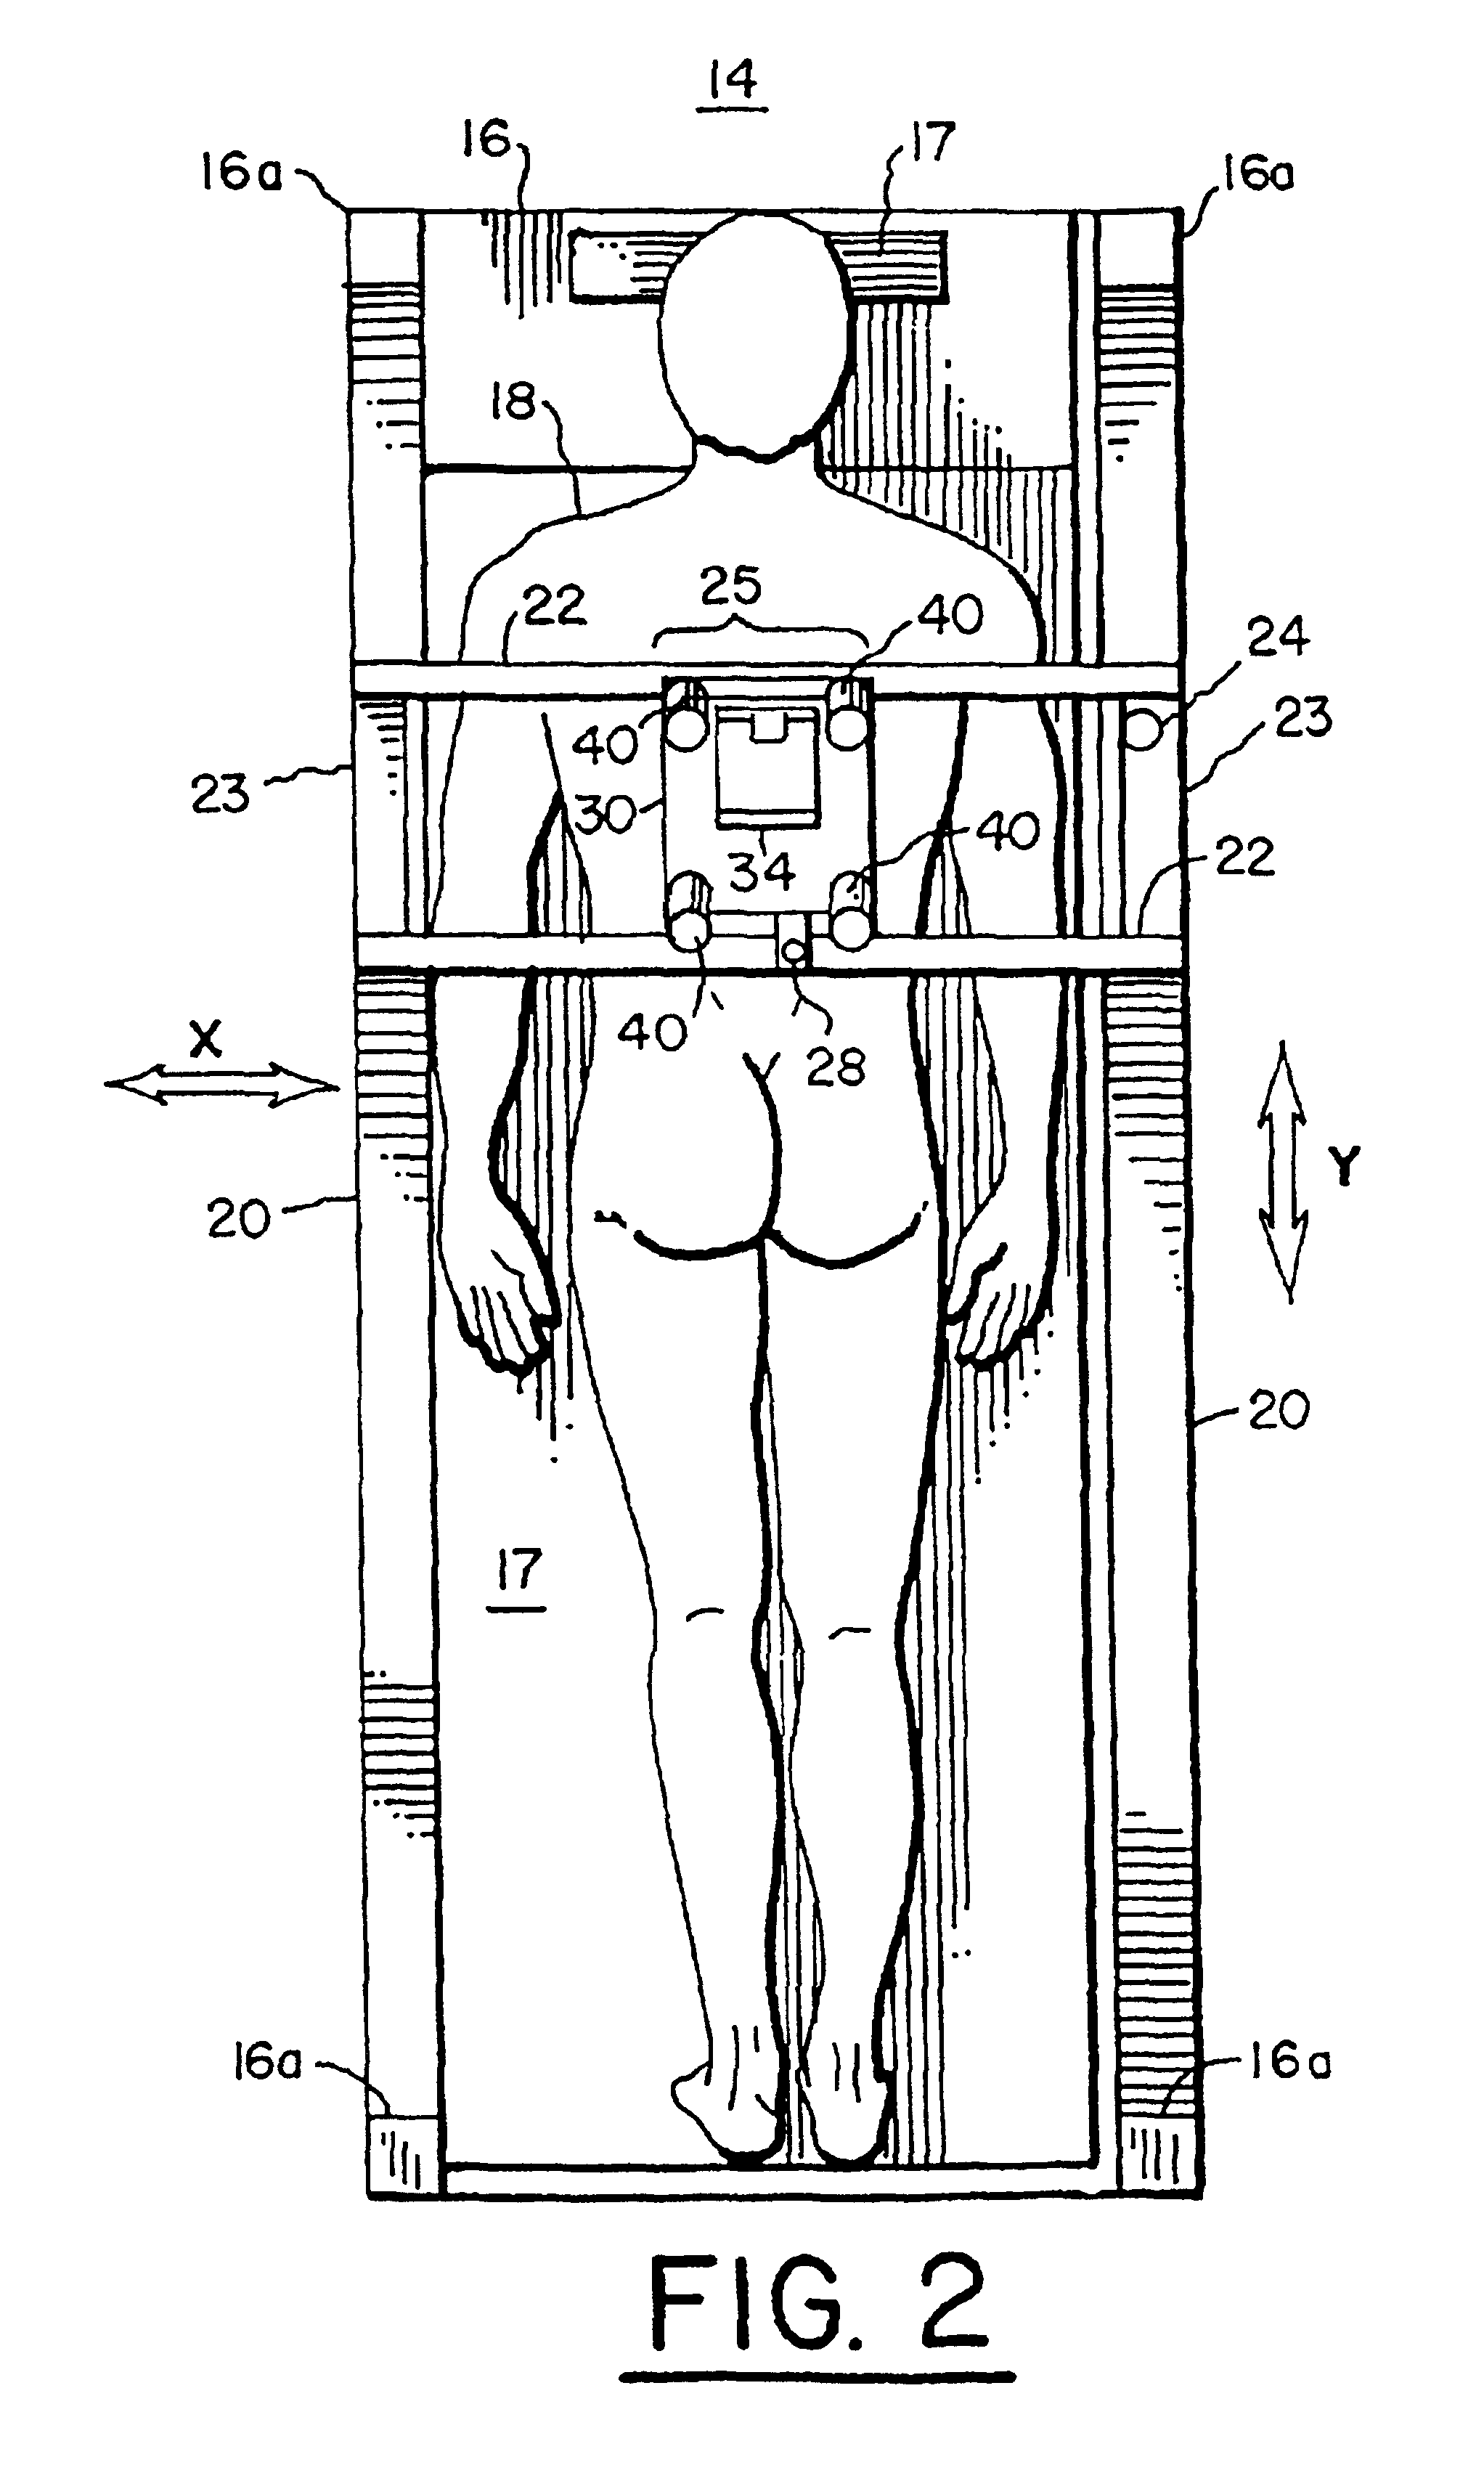 System for confocal imaging within dermal tissue